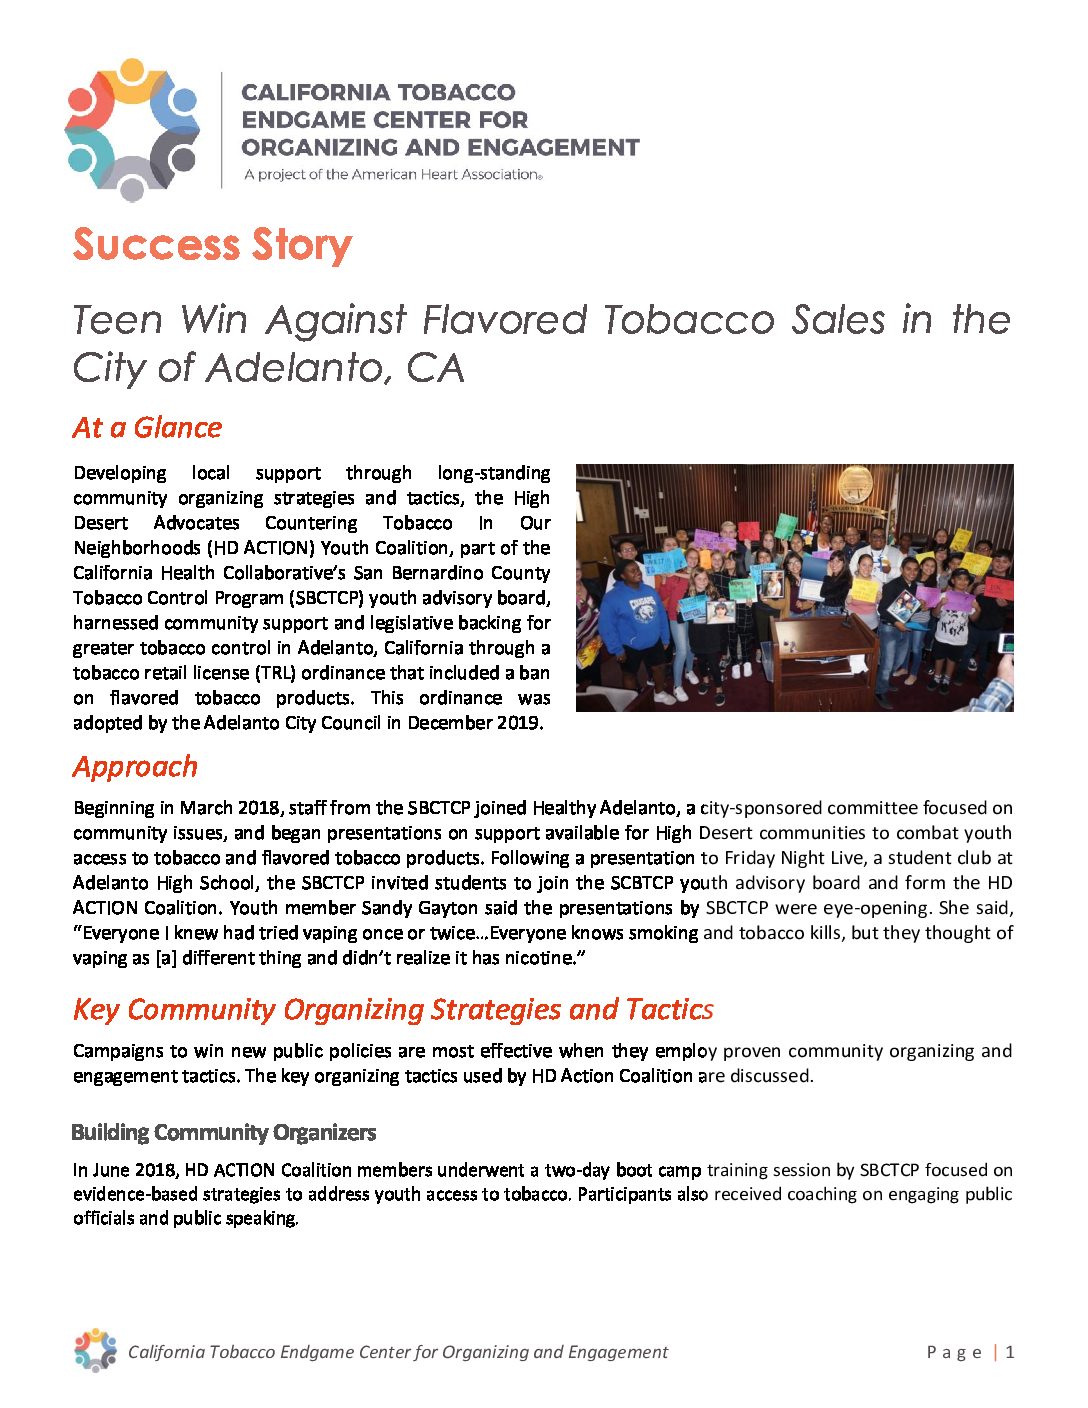 Teen Win Against Flavored Tobacco Sales in the City of Adelanto, CA